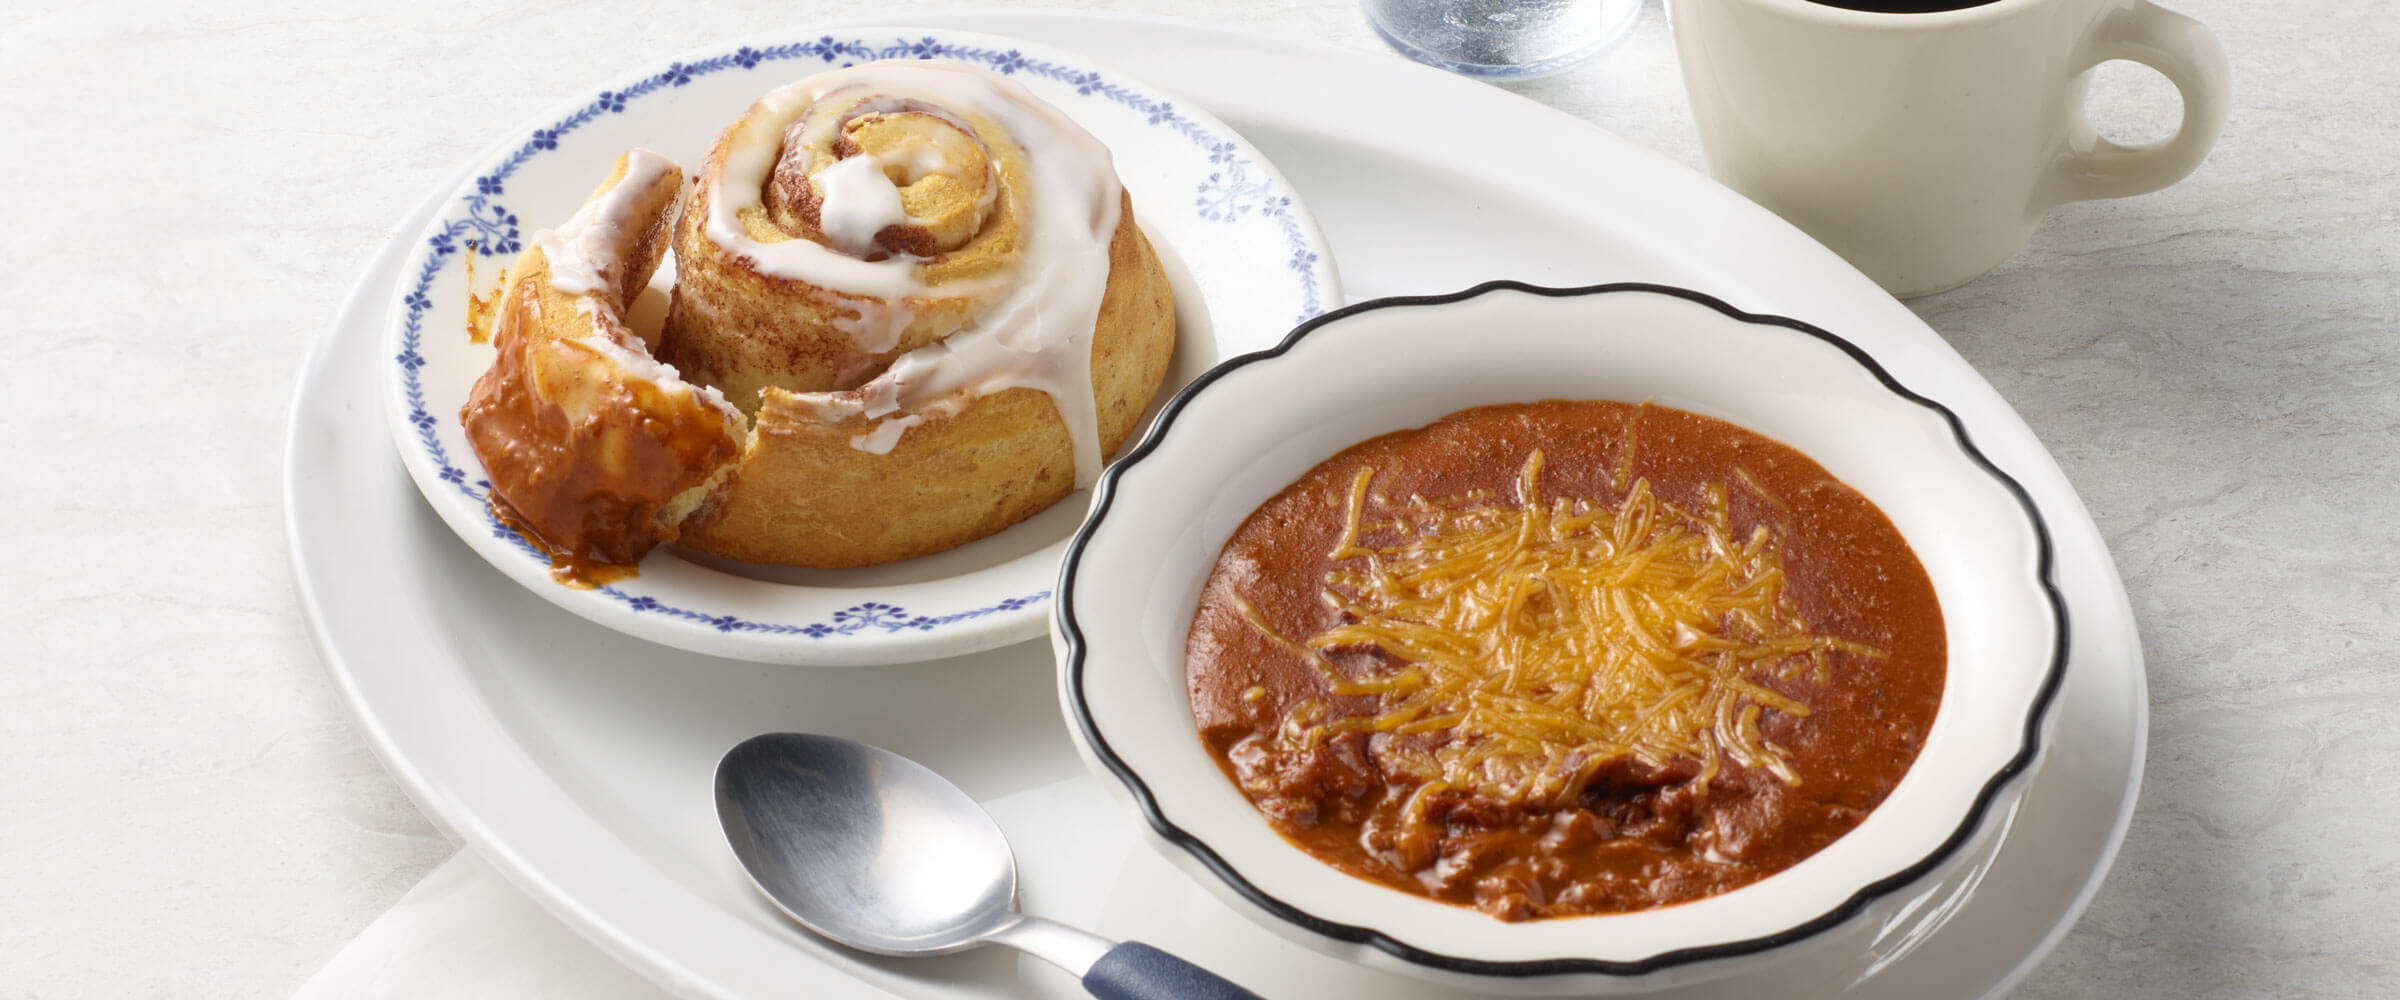 Chili topped with cheese and Cinnamon Roll on white dishes